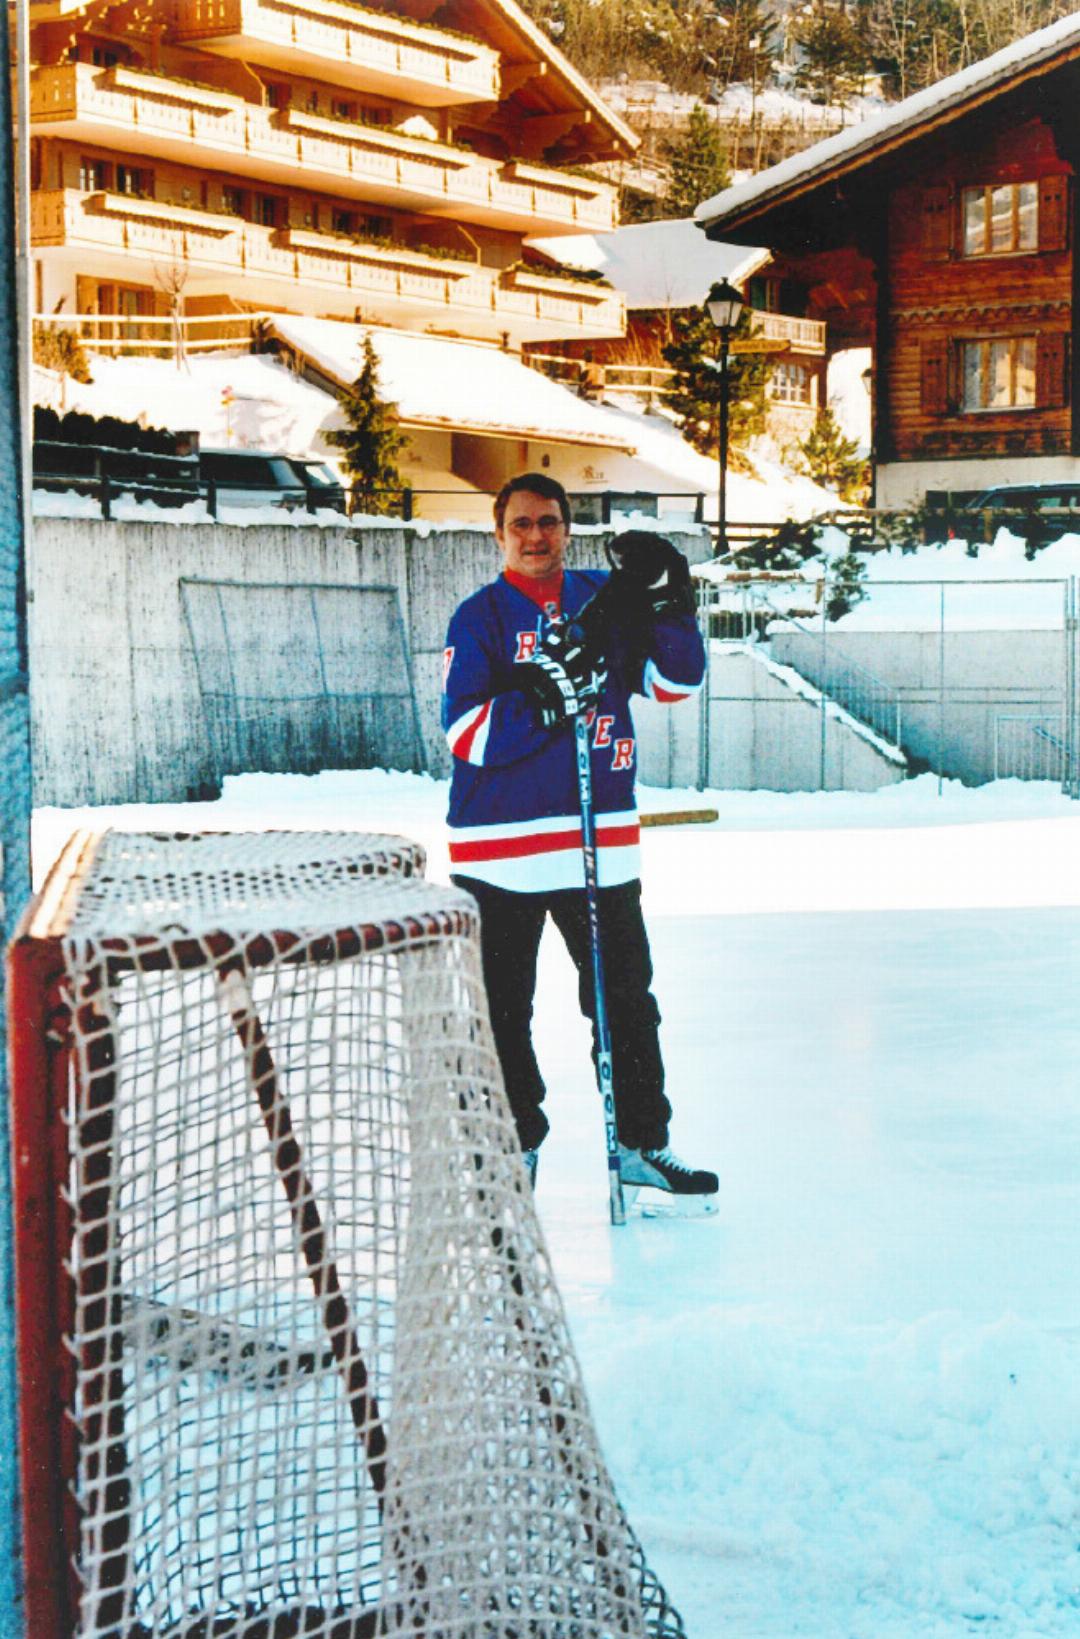 2007, on the rink in Gstaad